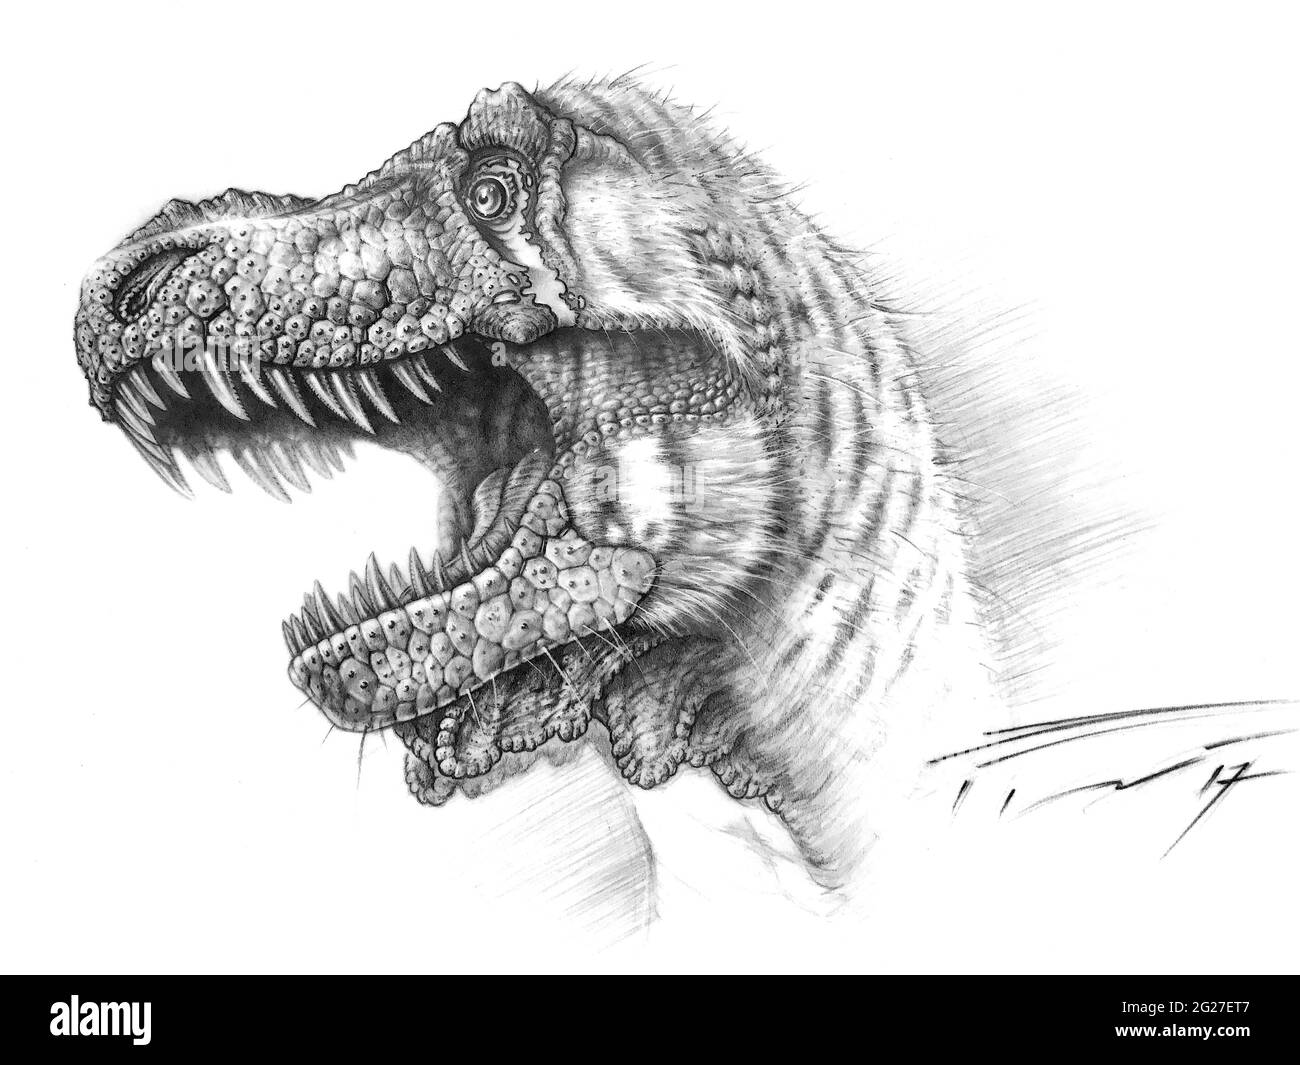 How to Draw a Tyrannosaurus Rex  Step By Step  YouTube